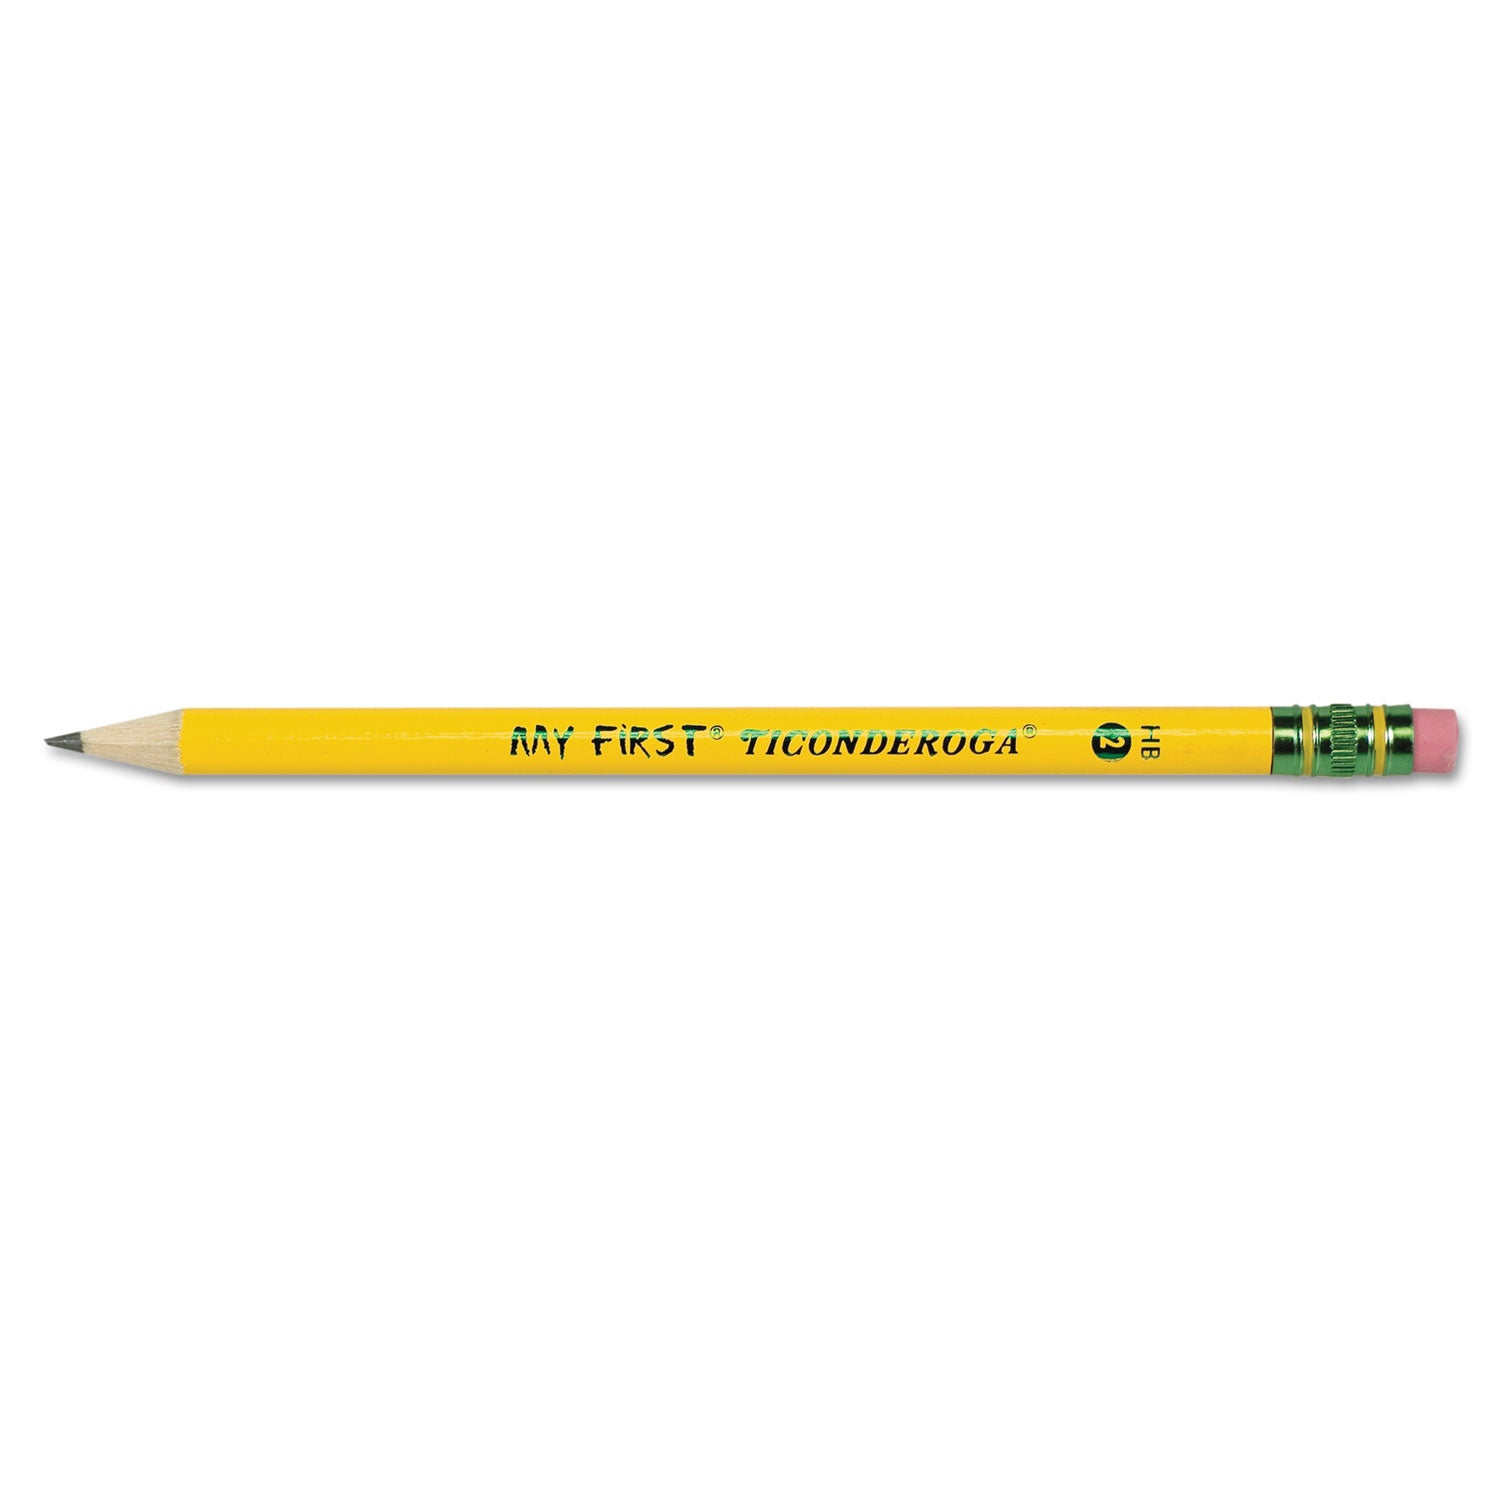 My First Woodcase Pencil with Eraser, HB (#2), Black Lead, Yellow Barrel, Dozen - 